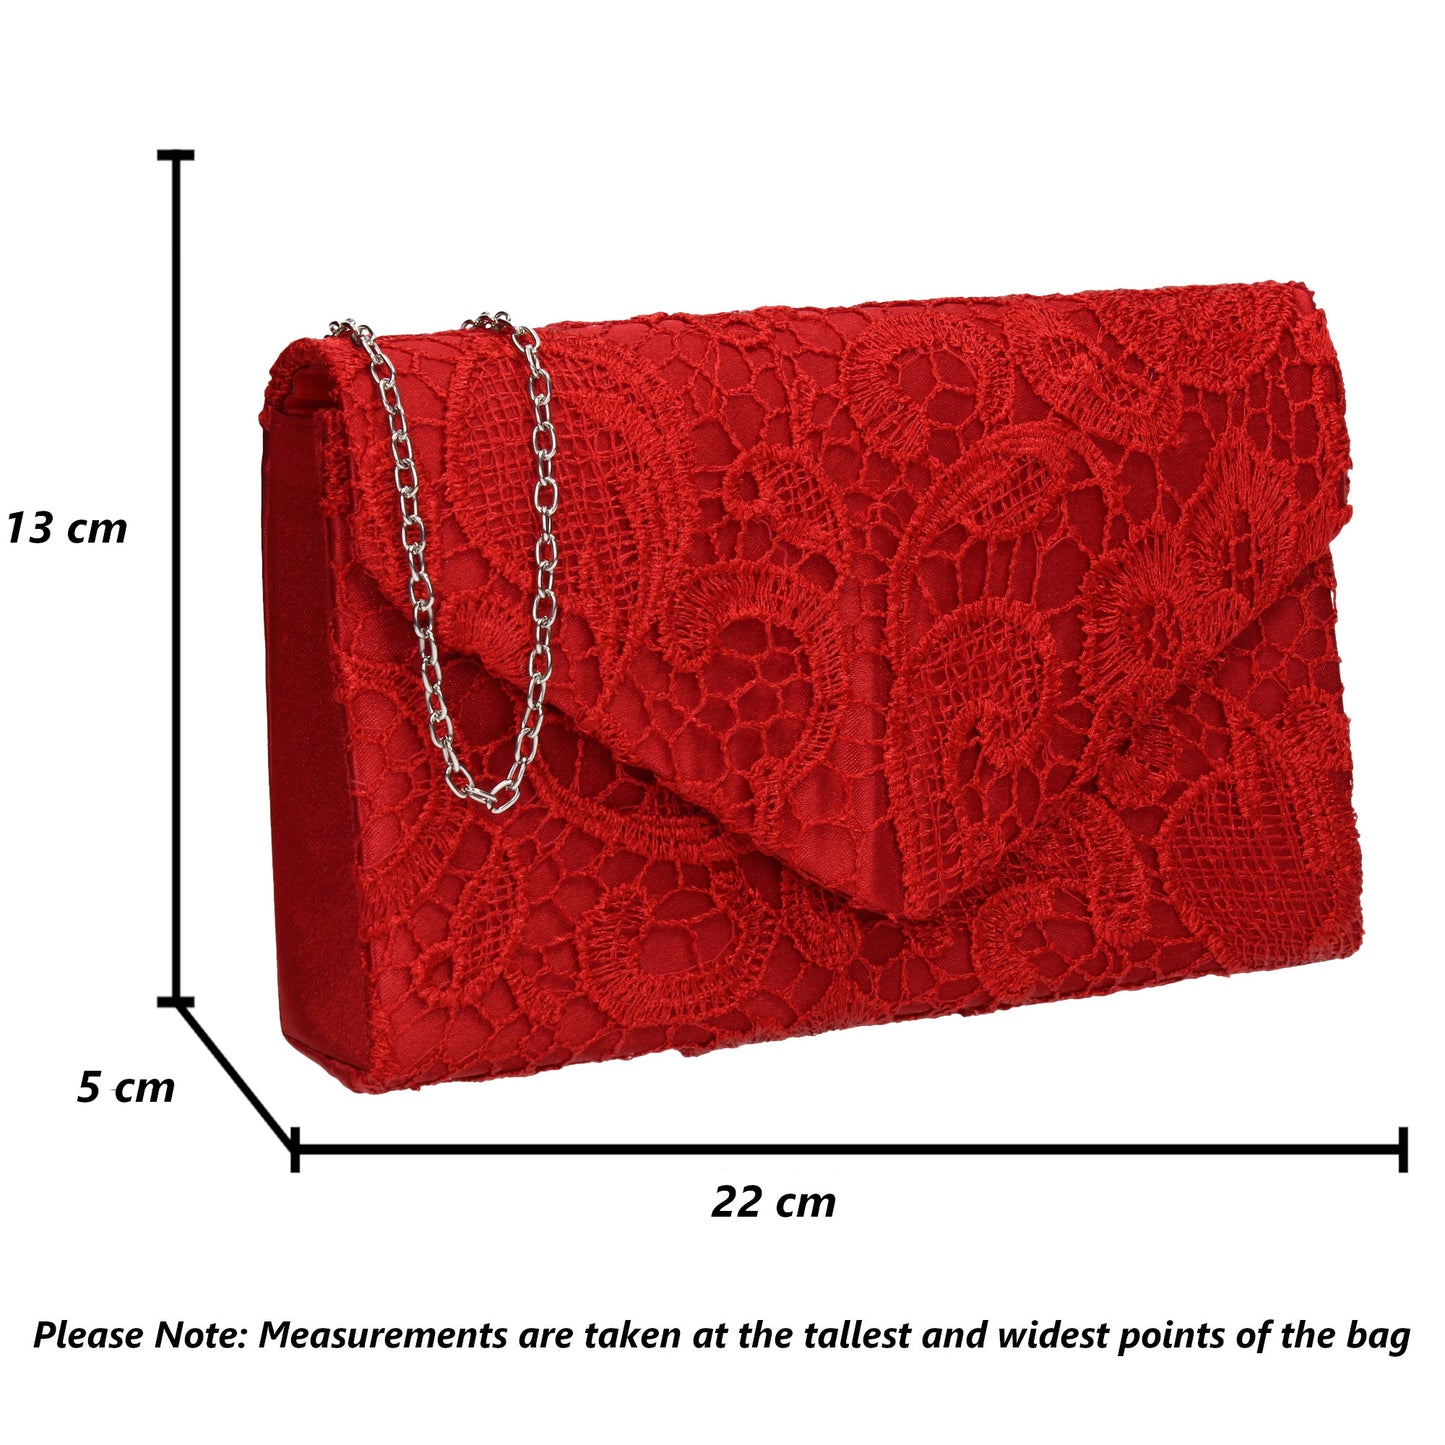 Holly Lace Clutch Bag Red